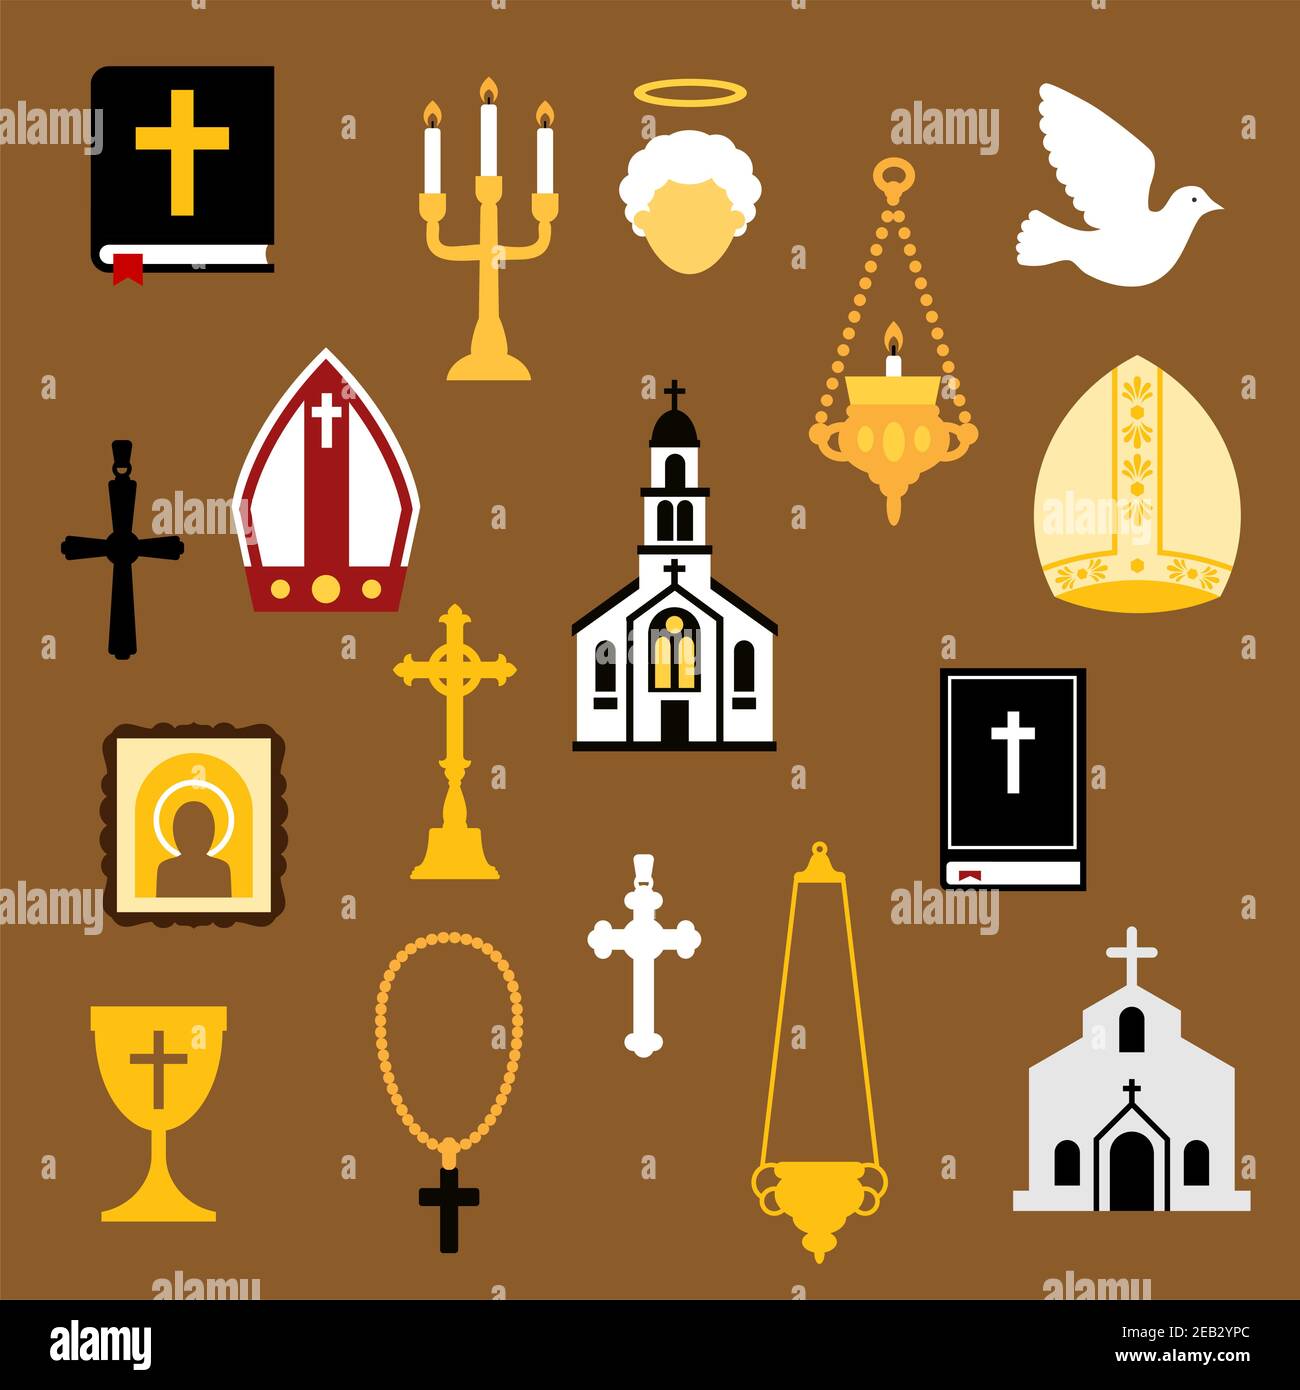 Religious flat icons with bible books, crosses, chalice, rosary, church or temple building, angel, white dove, icon, mitres and candelabras Stock Vector